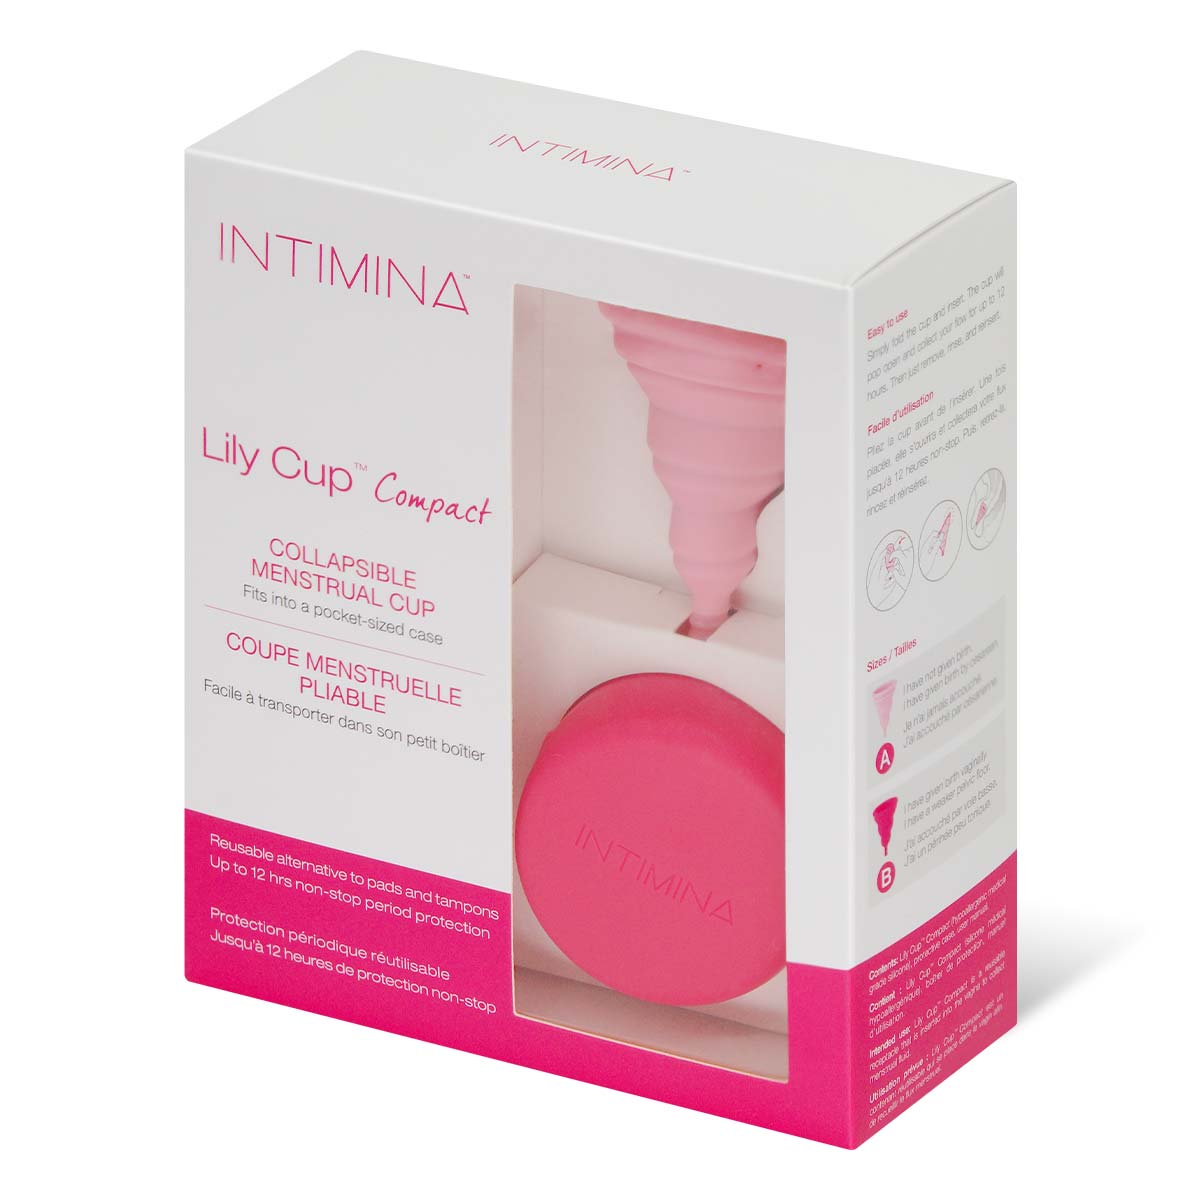 Intimina Lily Cup Compact 摺叠式月经杯 (Size A)-p_1